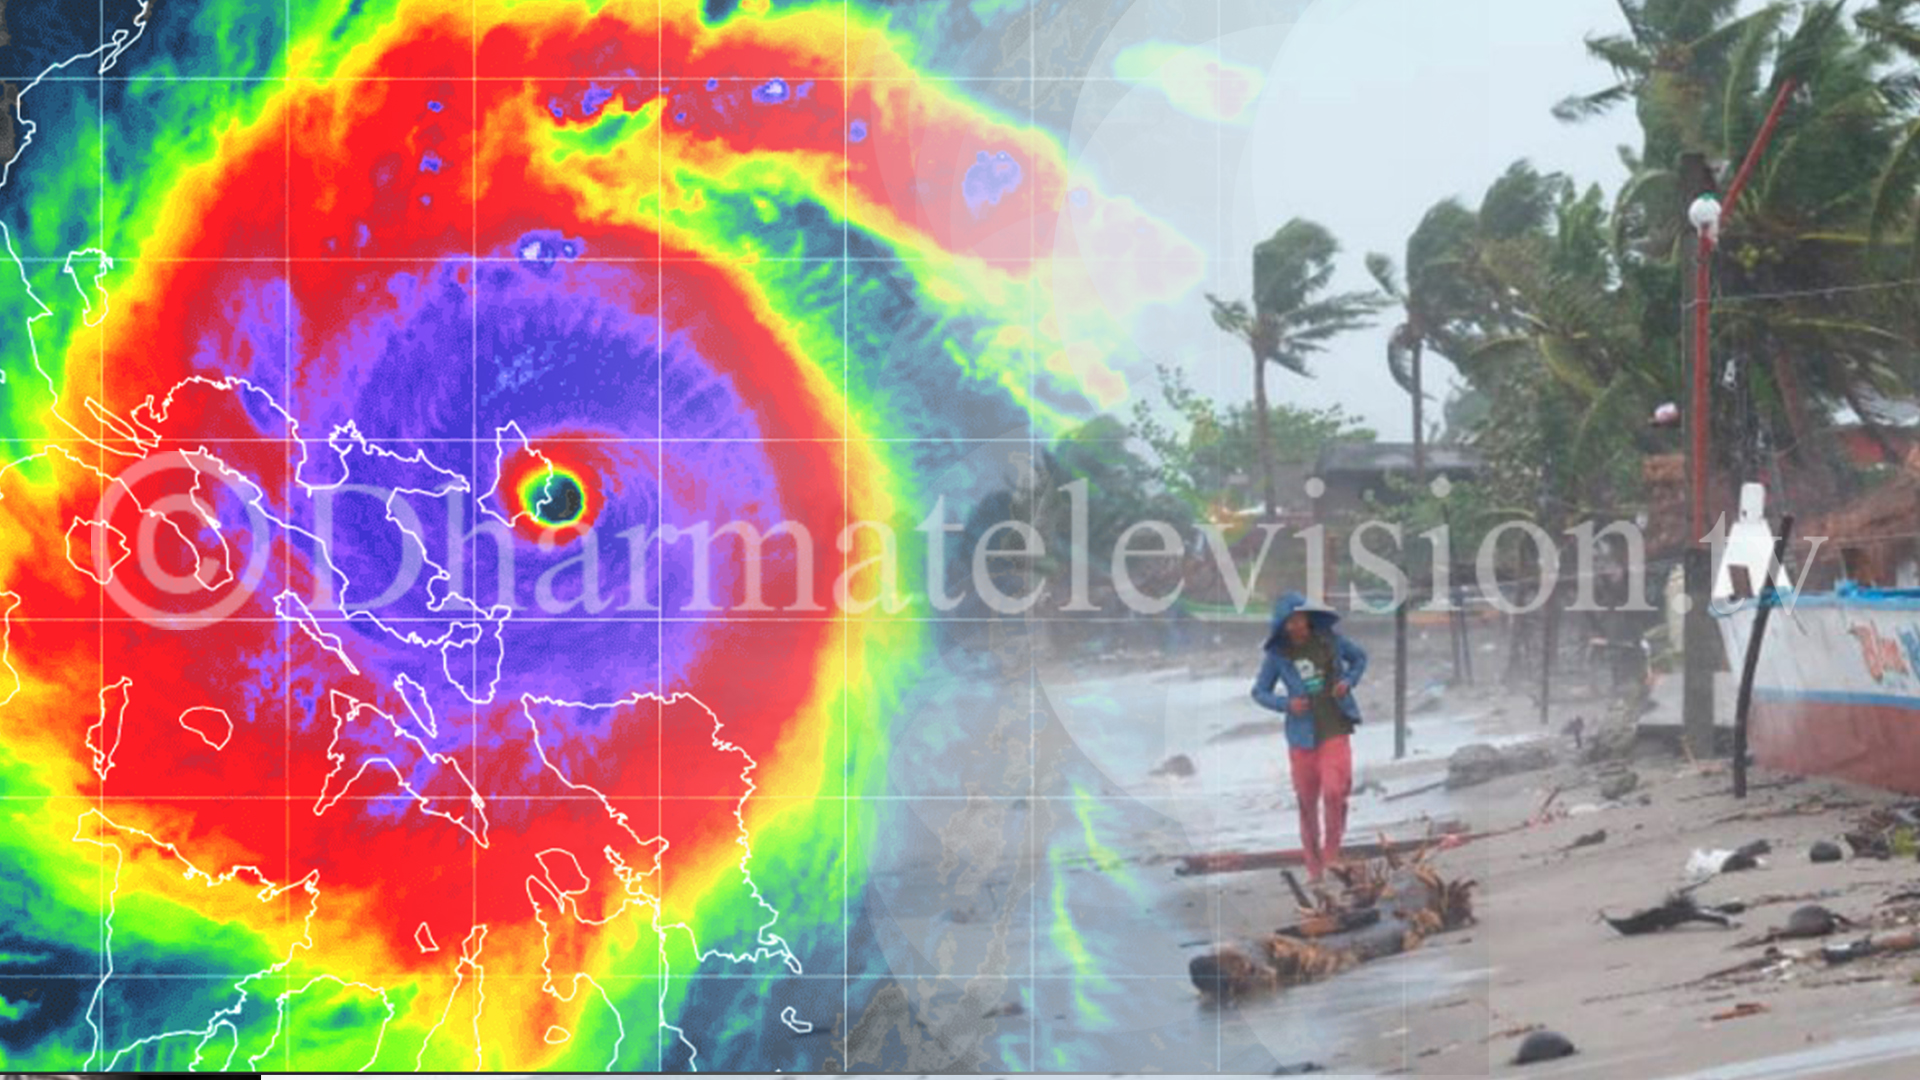 Landfall by Super Typhoon Goni, strongest typhoon so far, in Philippines